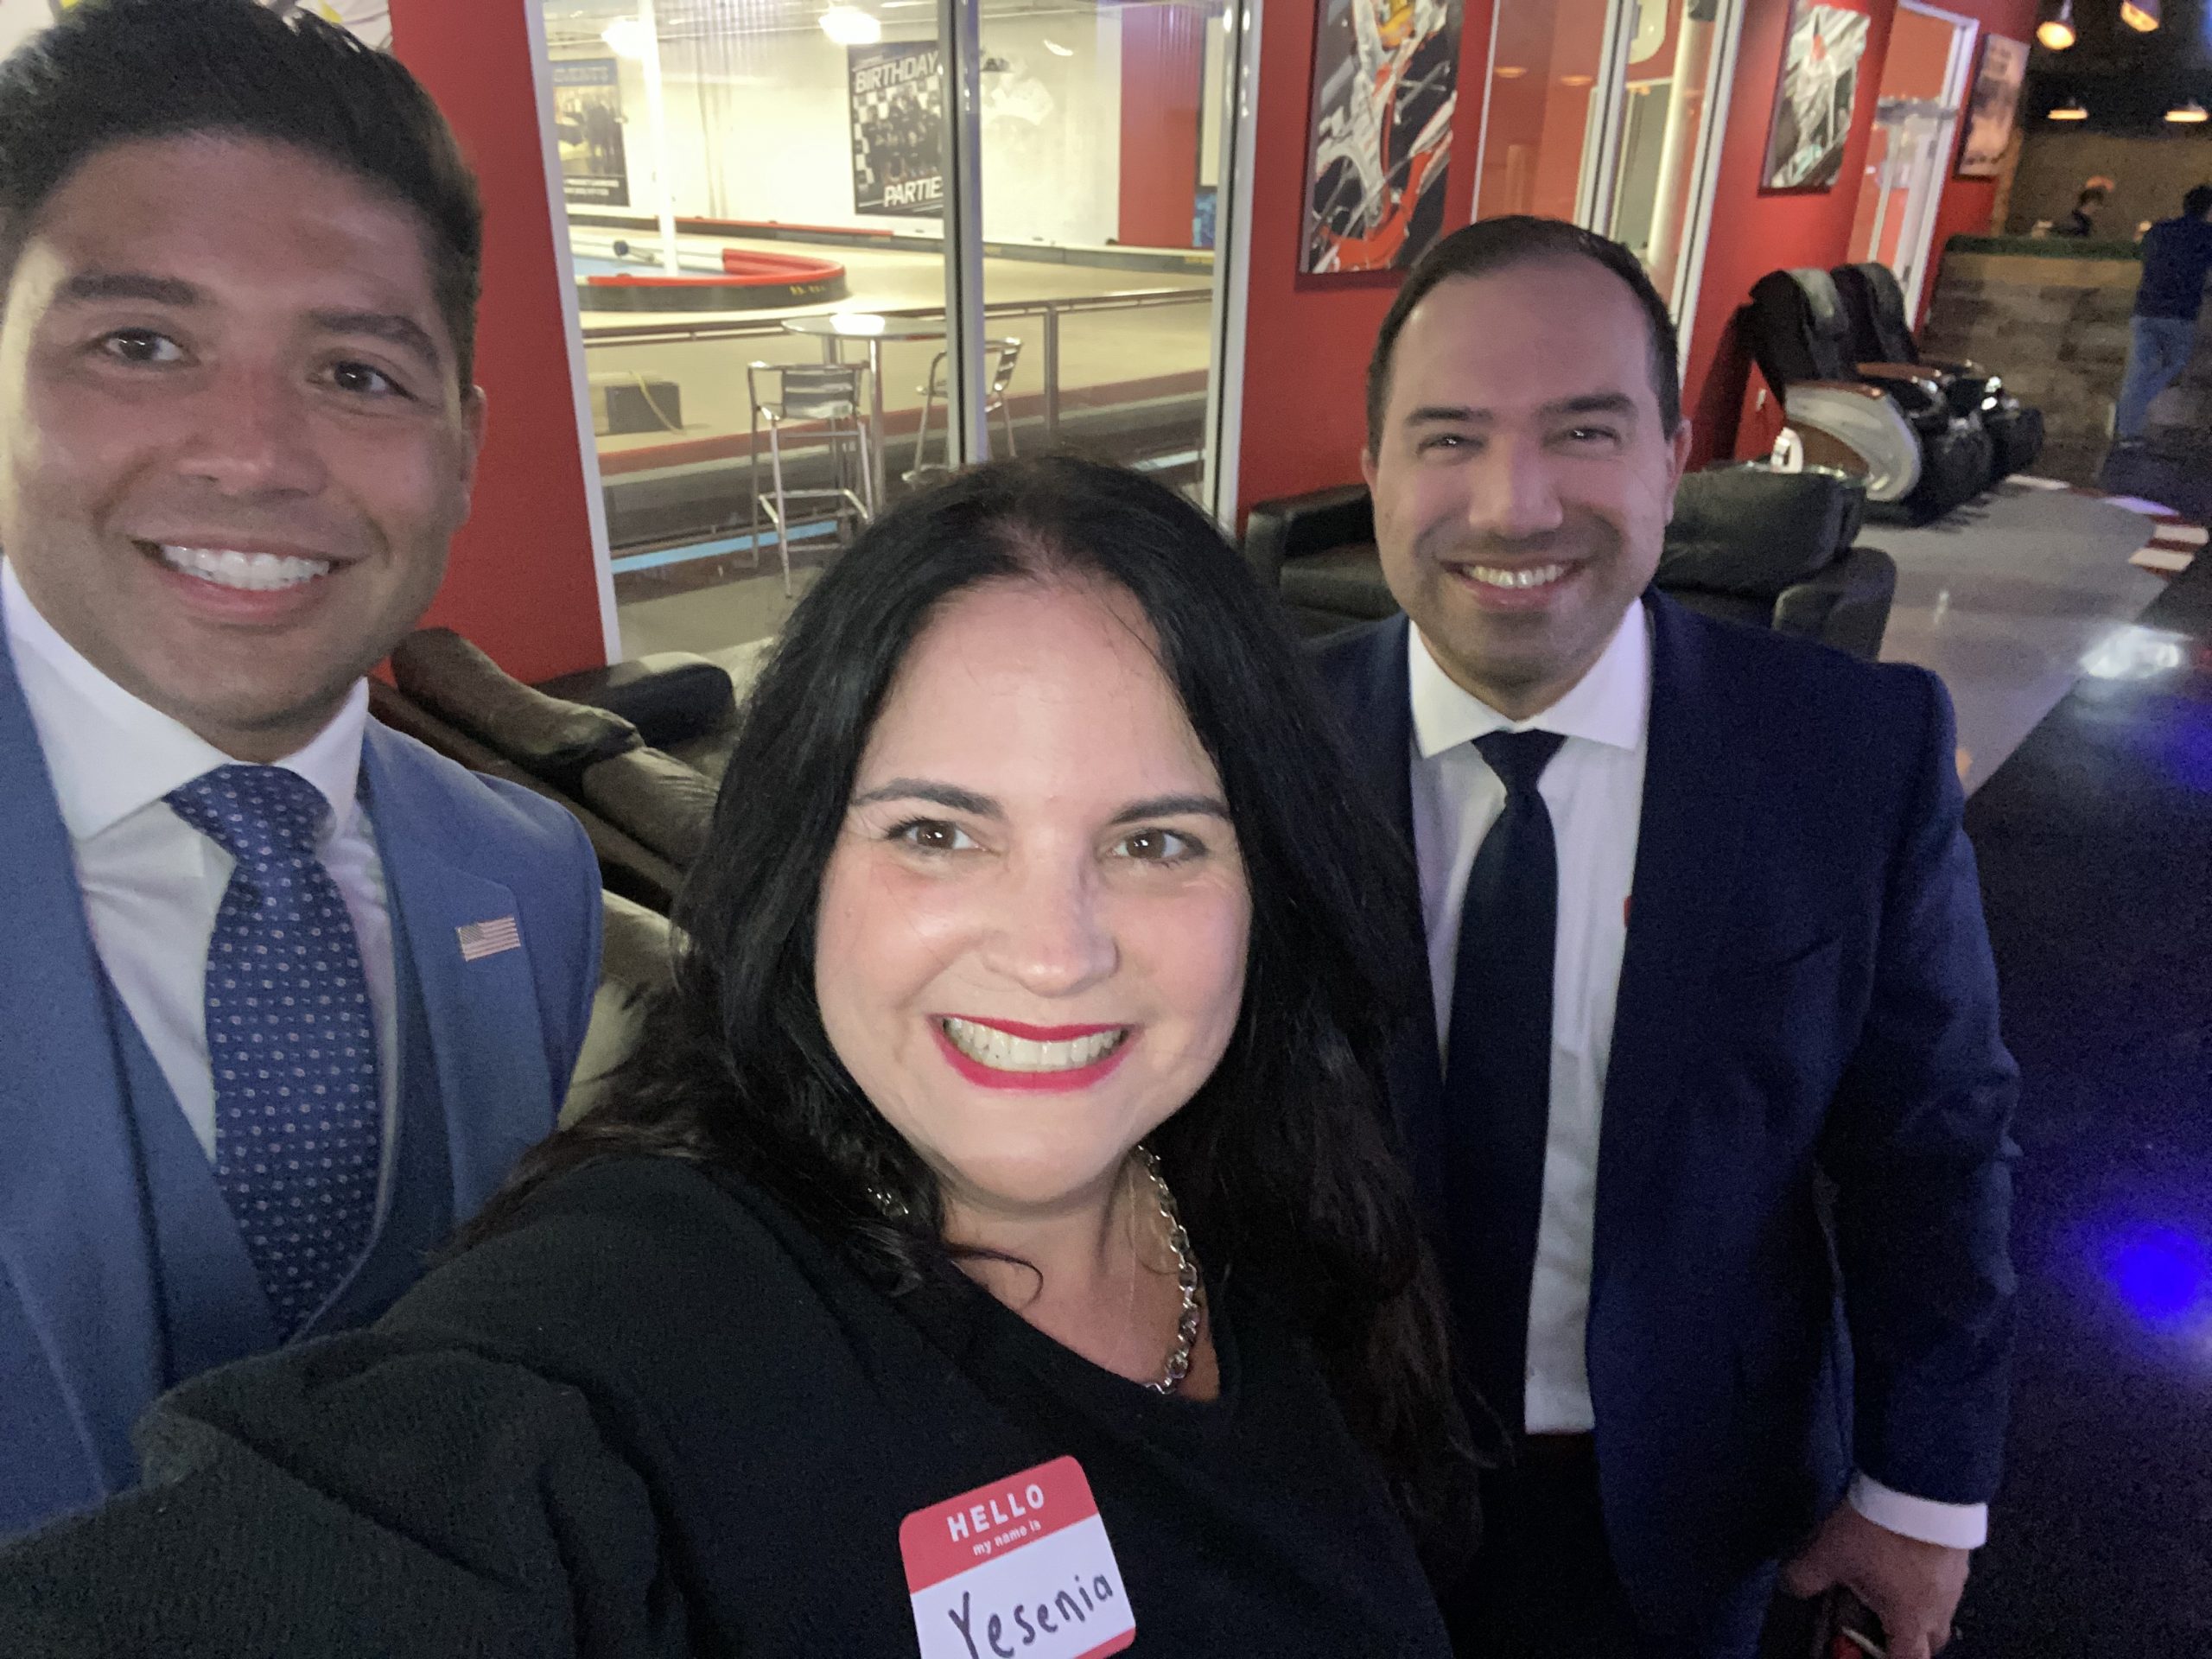 K1 Speed Networking Event Sponsored by Coral Gables Trust, Miami's Community Newspapers and K1 Speed. WIth Mayor Roberto Martell.